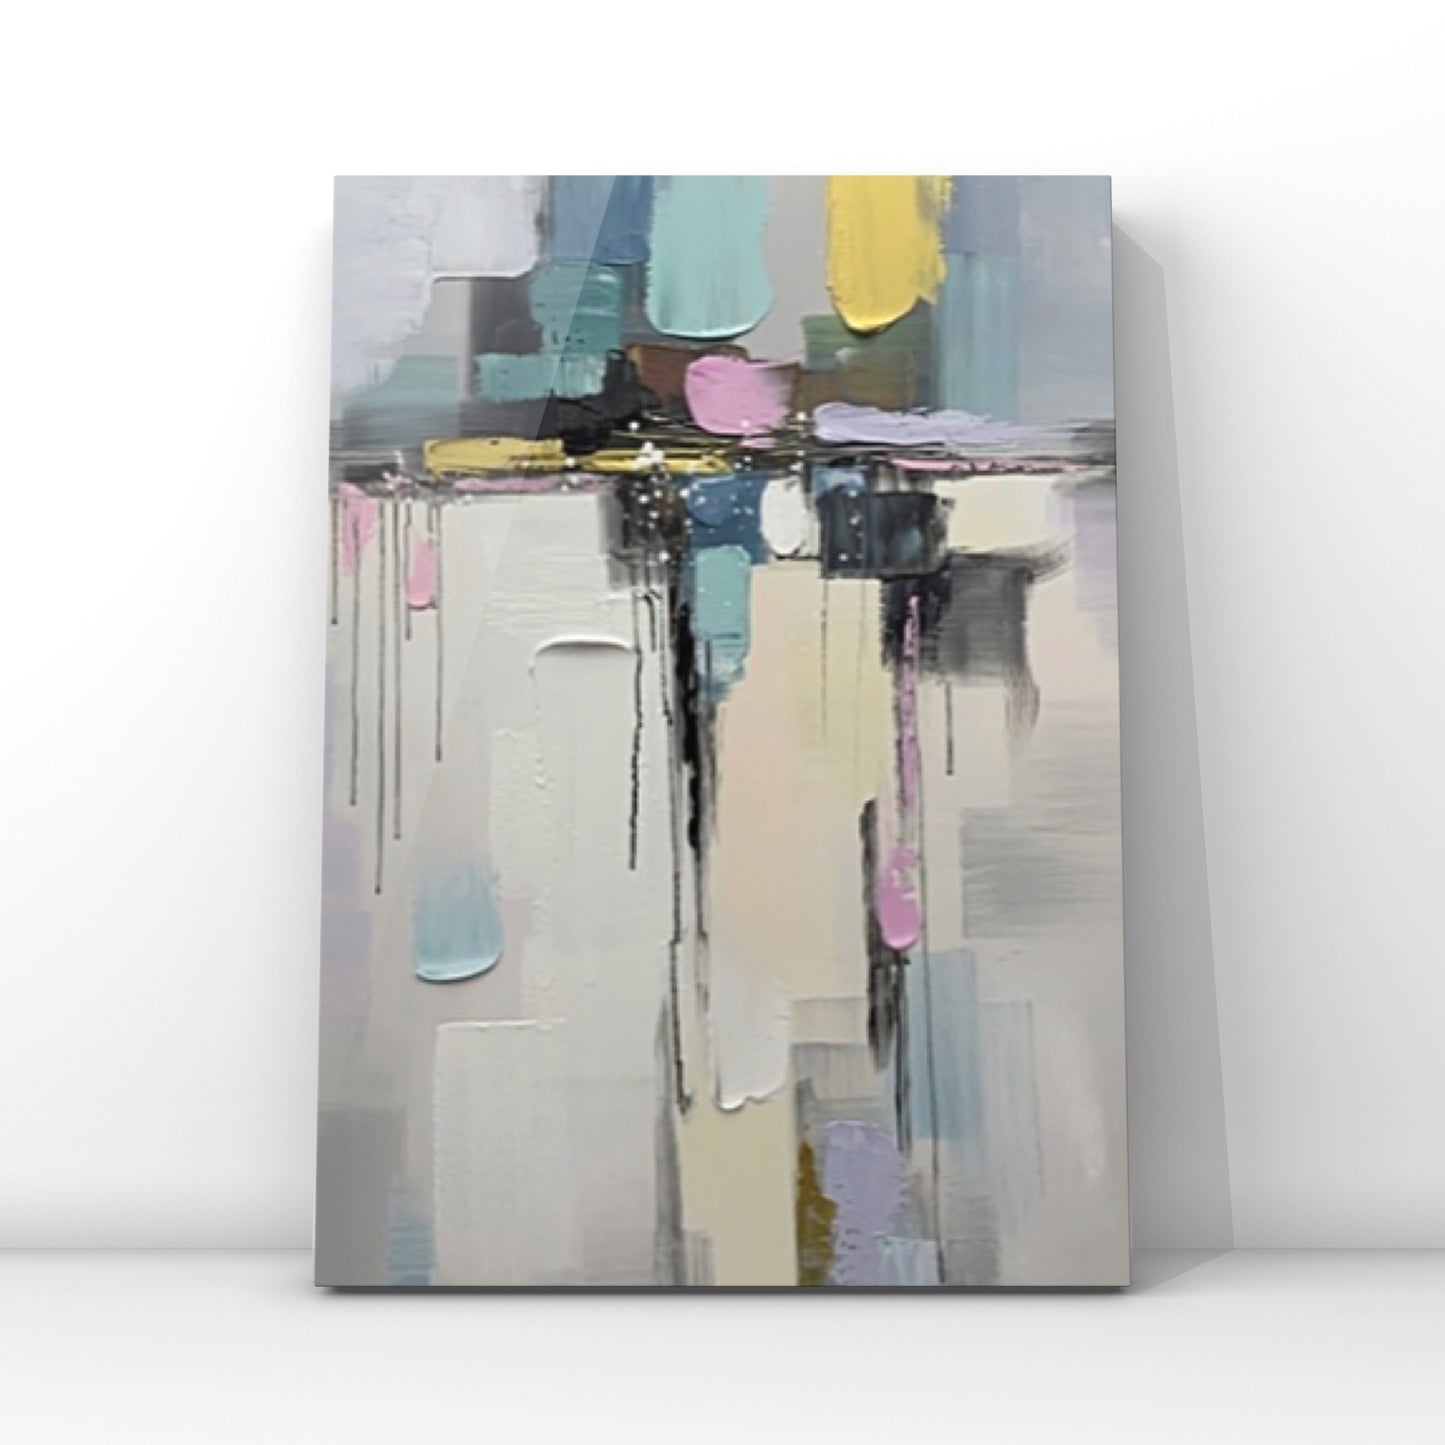 ABSTRACT PAINTING, MODEN LIFE, HAND-PAINTED CANVAS